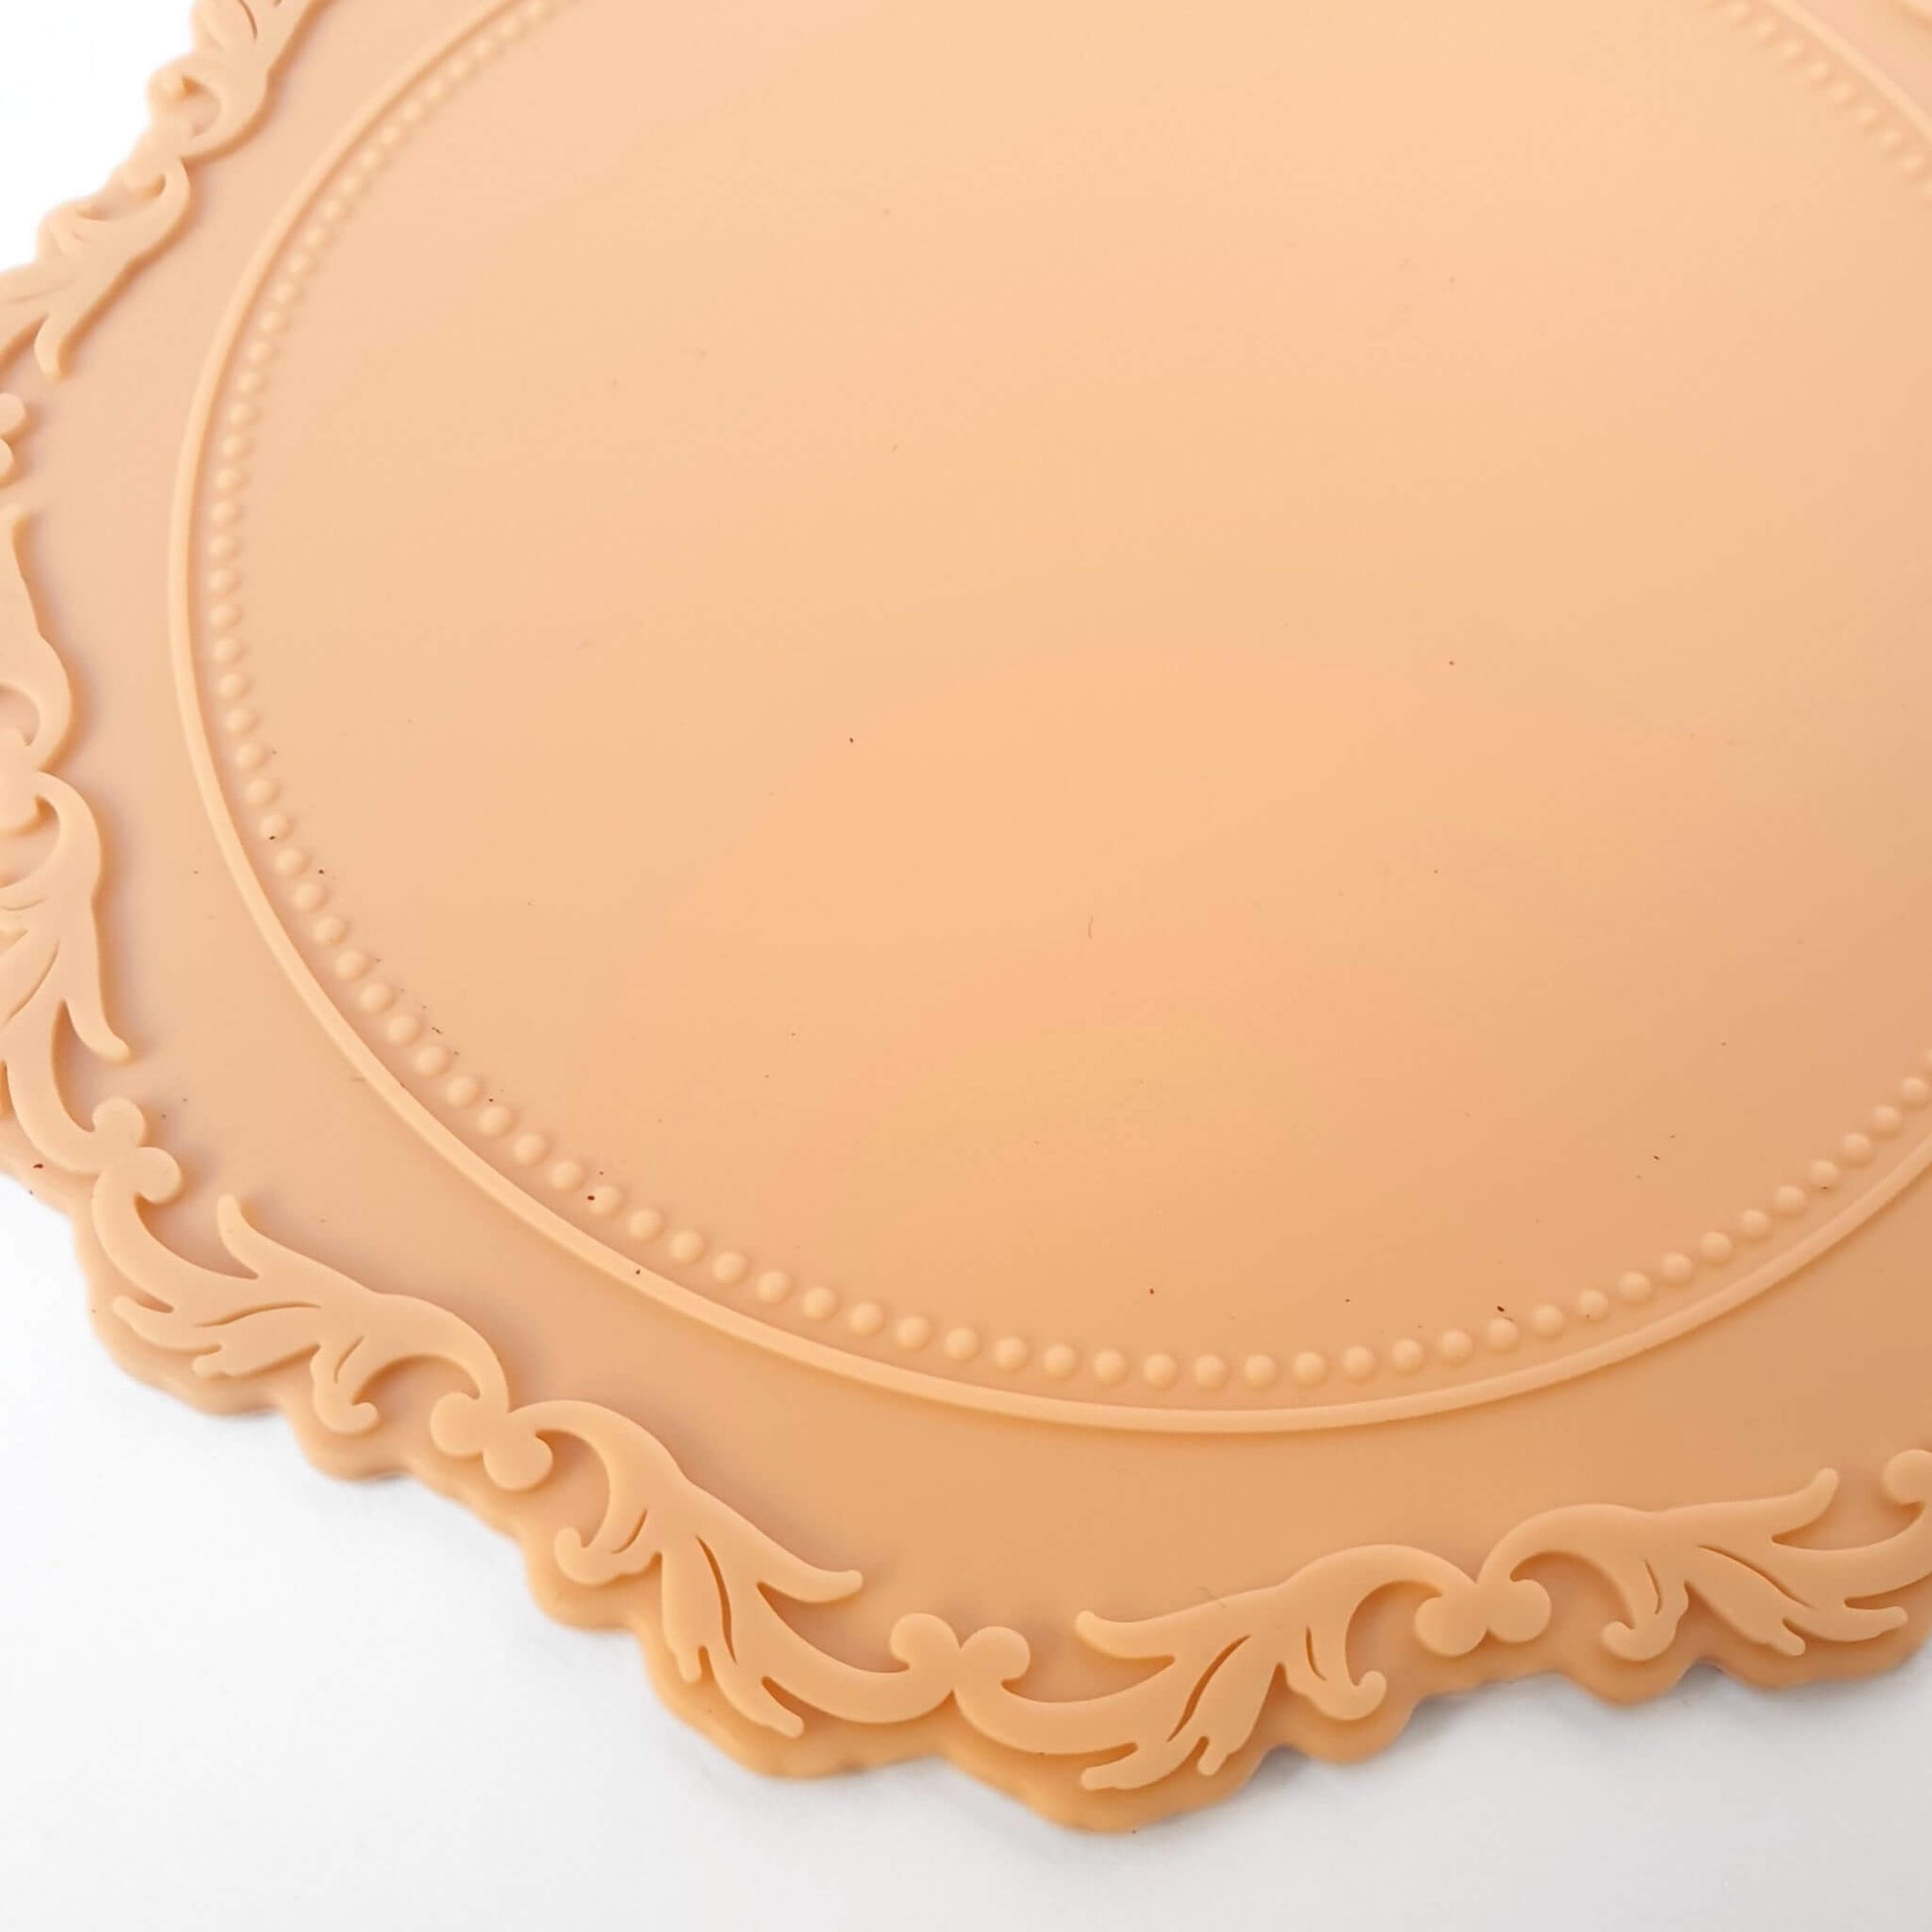 close up detail of peach coloured wax sealing mat with filigree edges